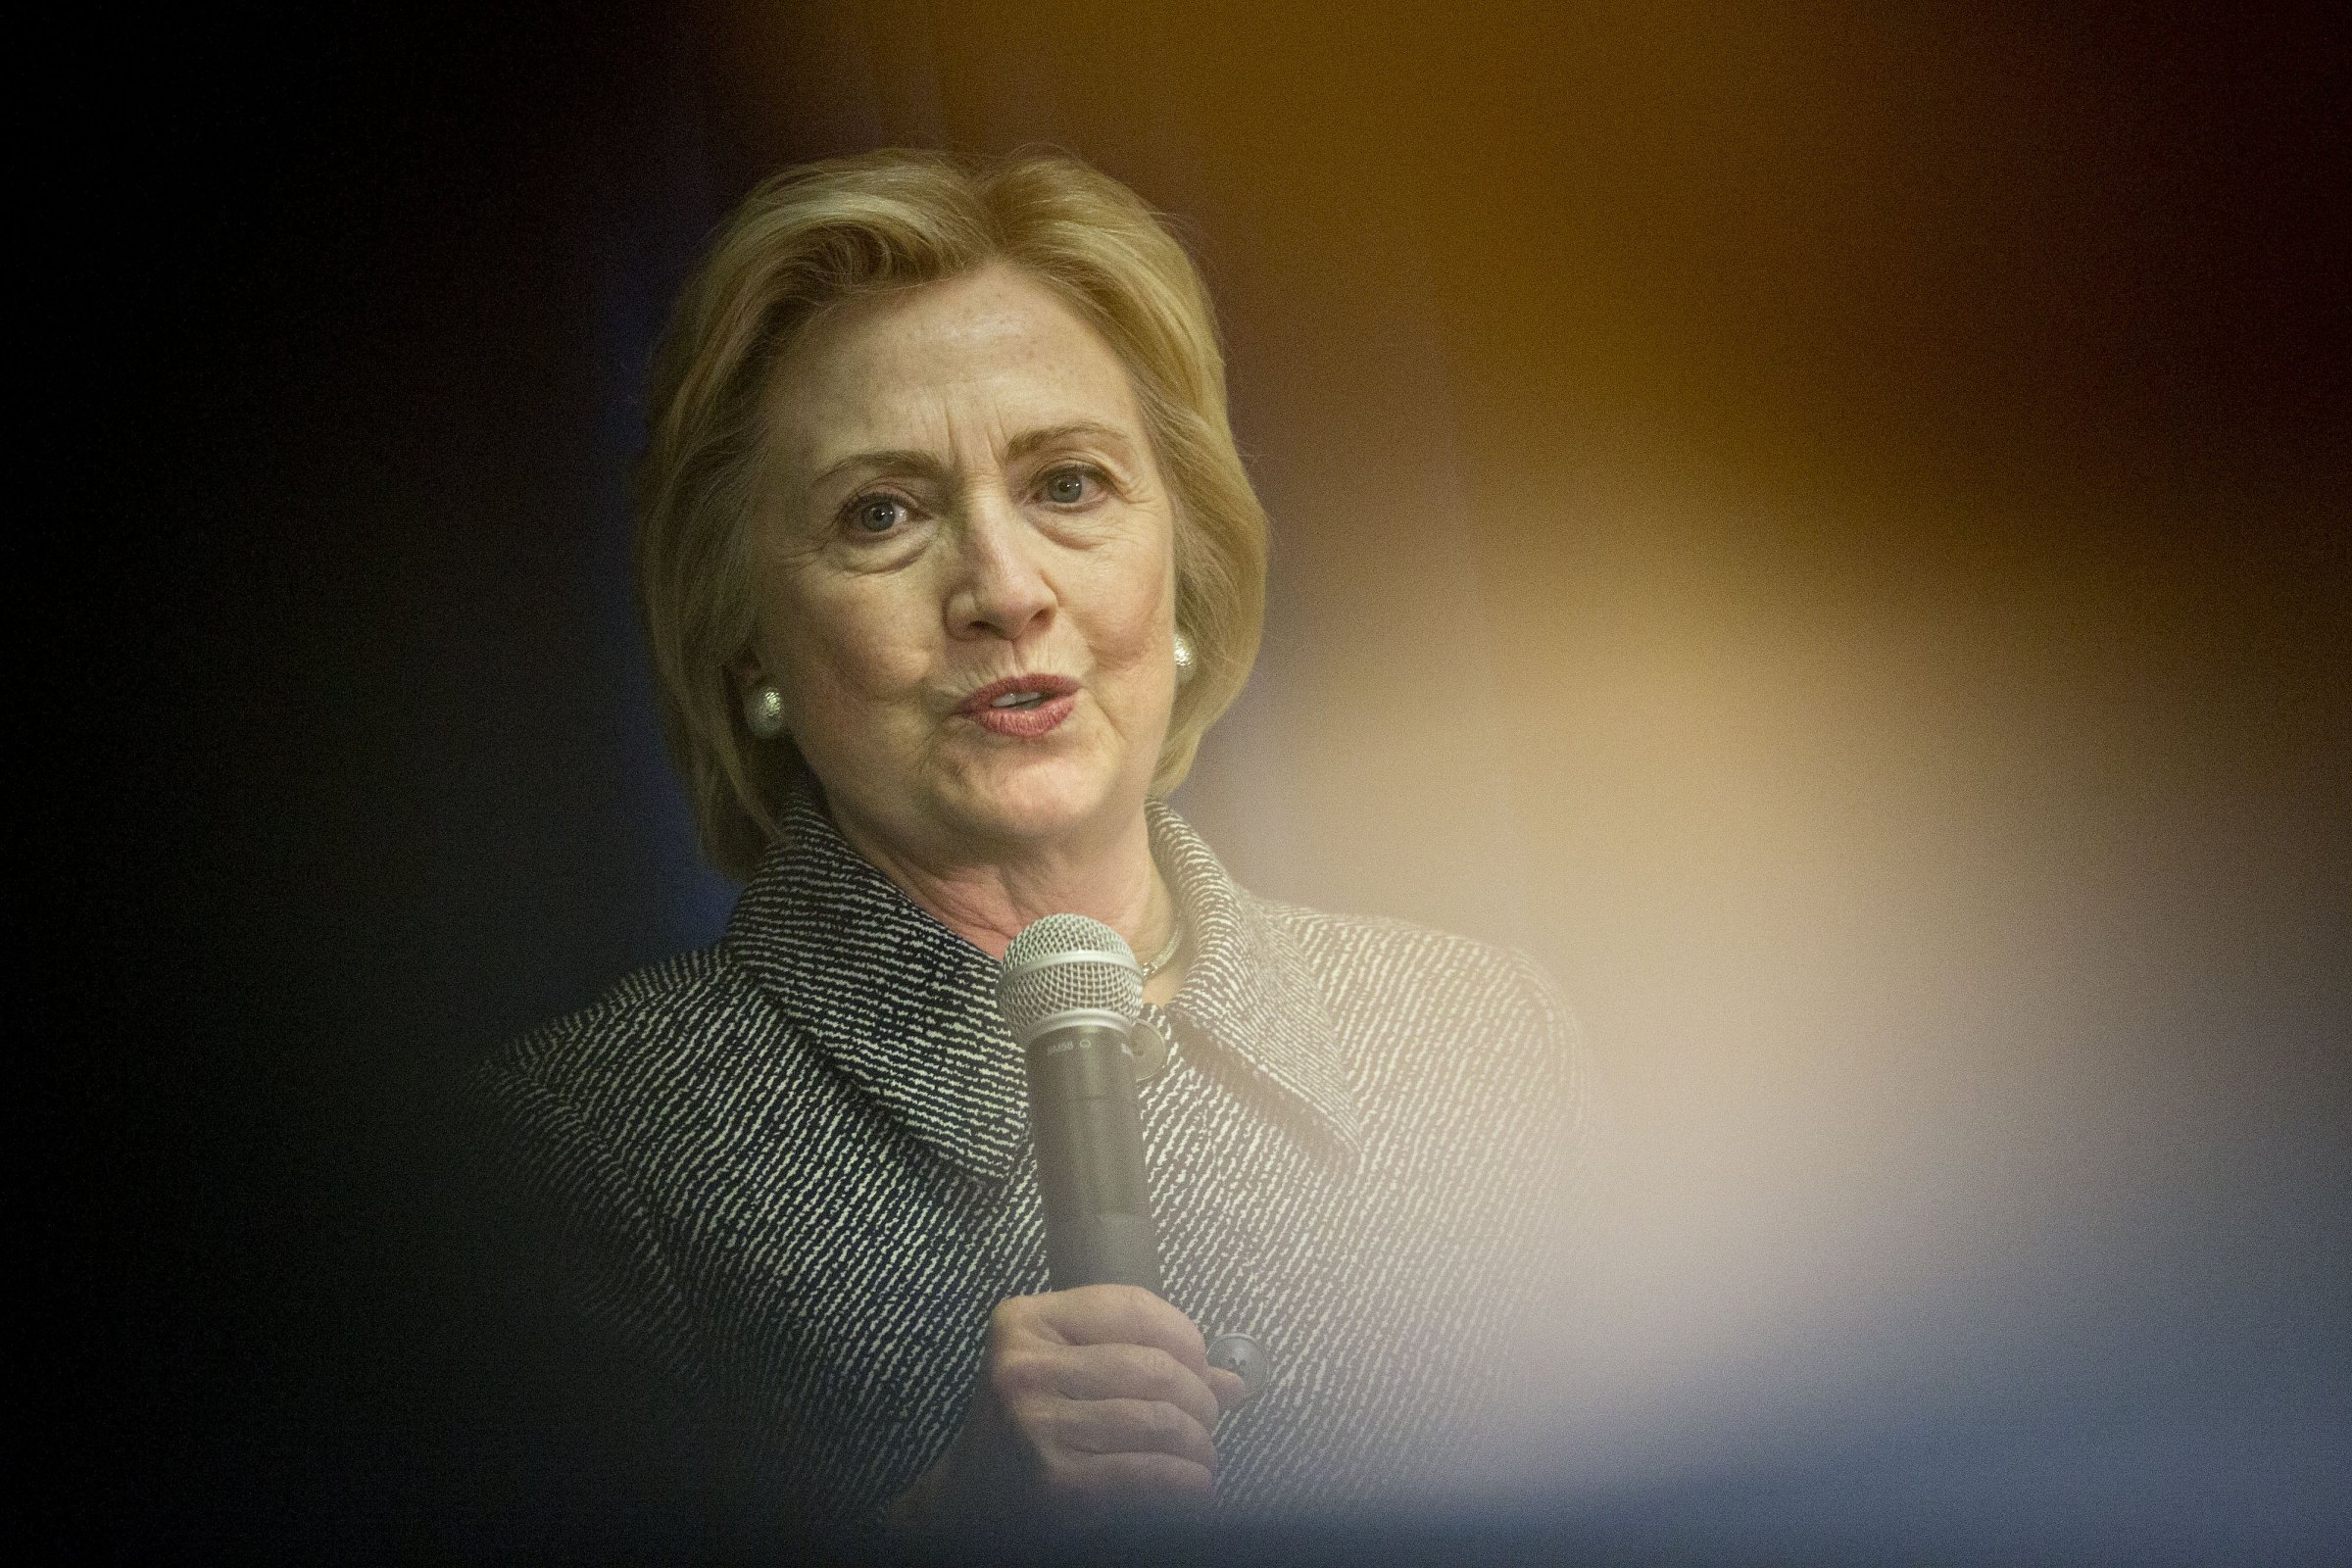 Hillary Clinton speaks during an event with campaign volunteers in Bettendorf, Iowa, on Dec. 22, 2015.